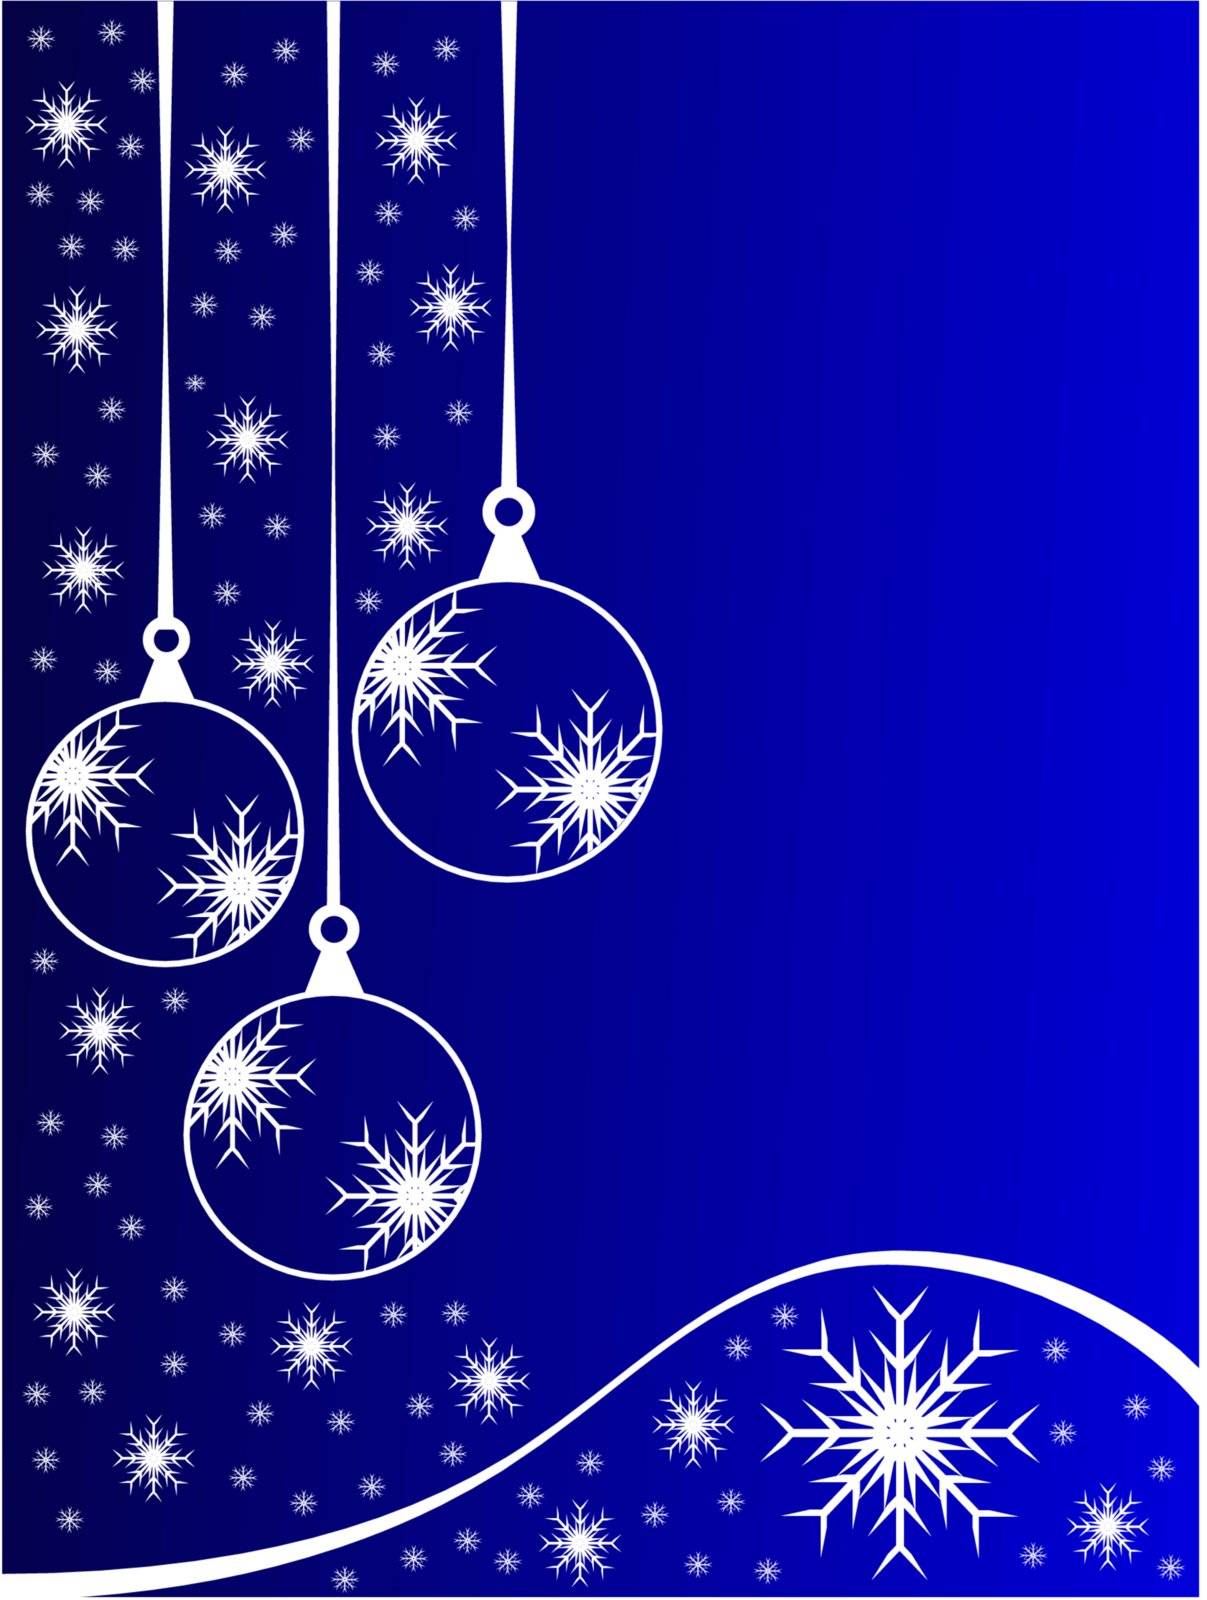 An abstract Christmas vector illustration with clear white outline baubles on a blue backdrop with white snowflakes and room for text